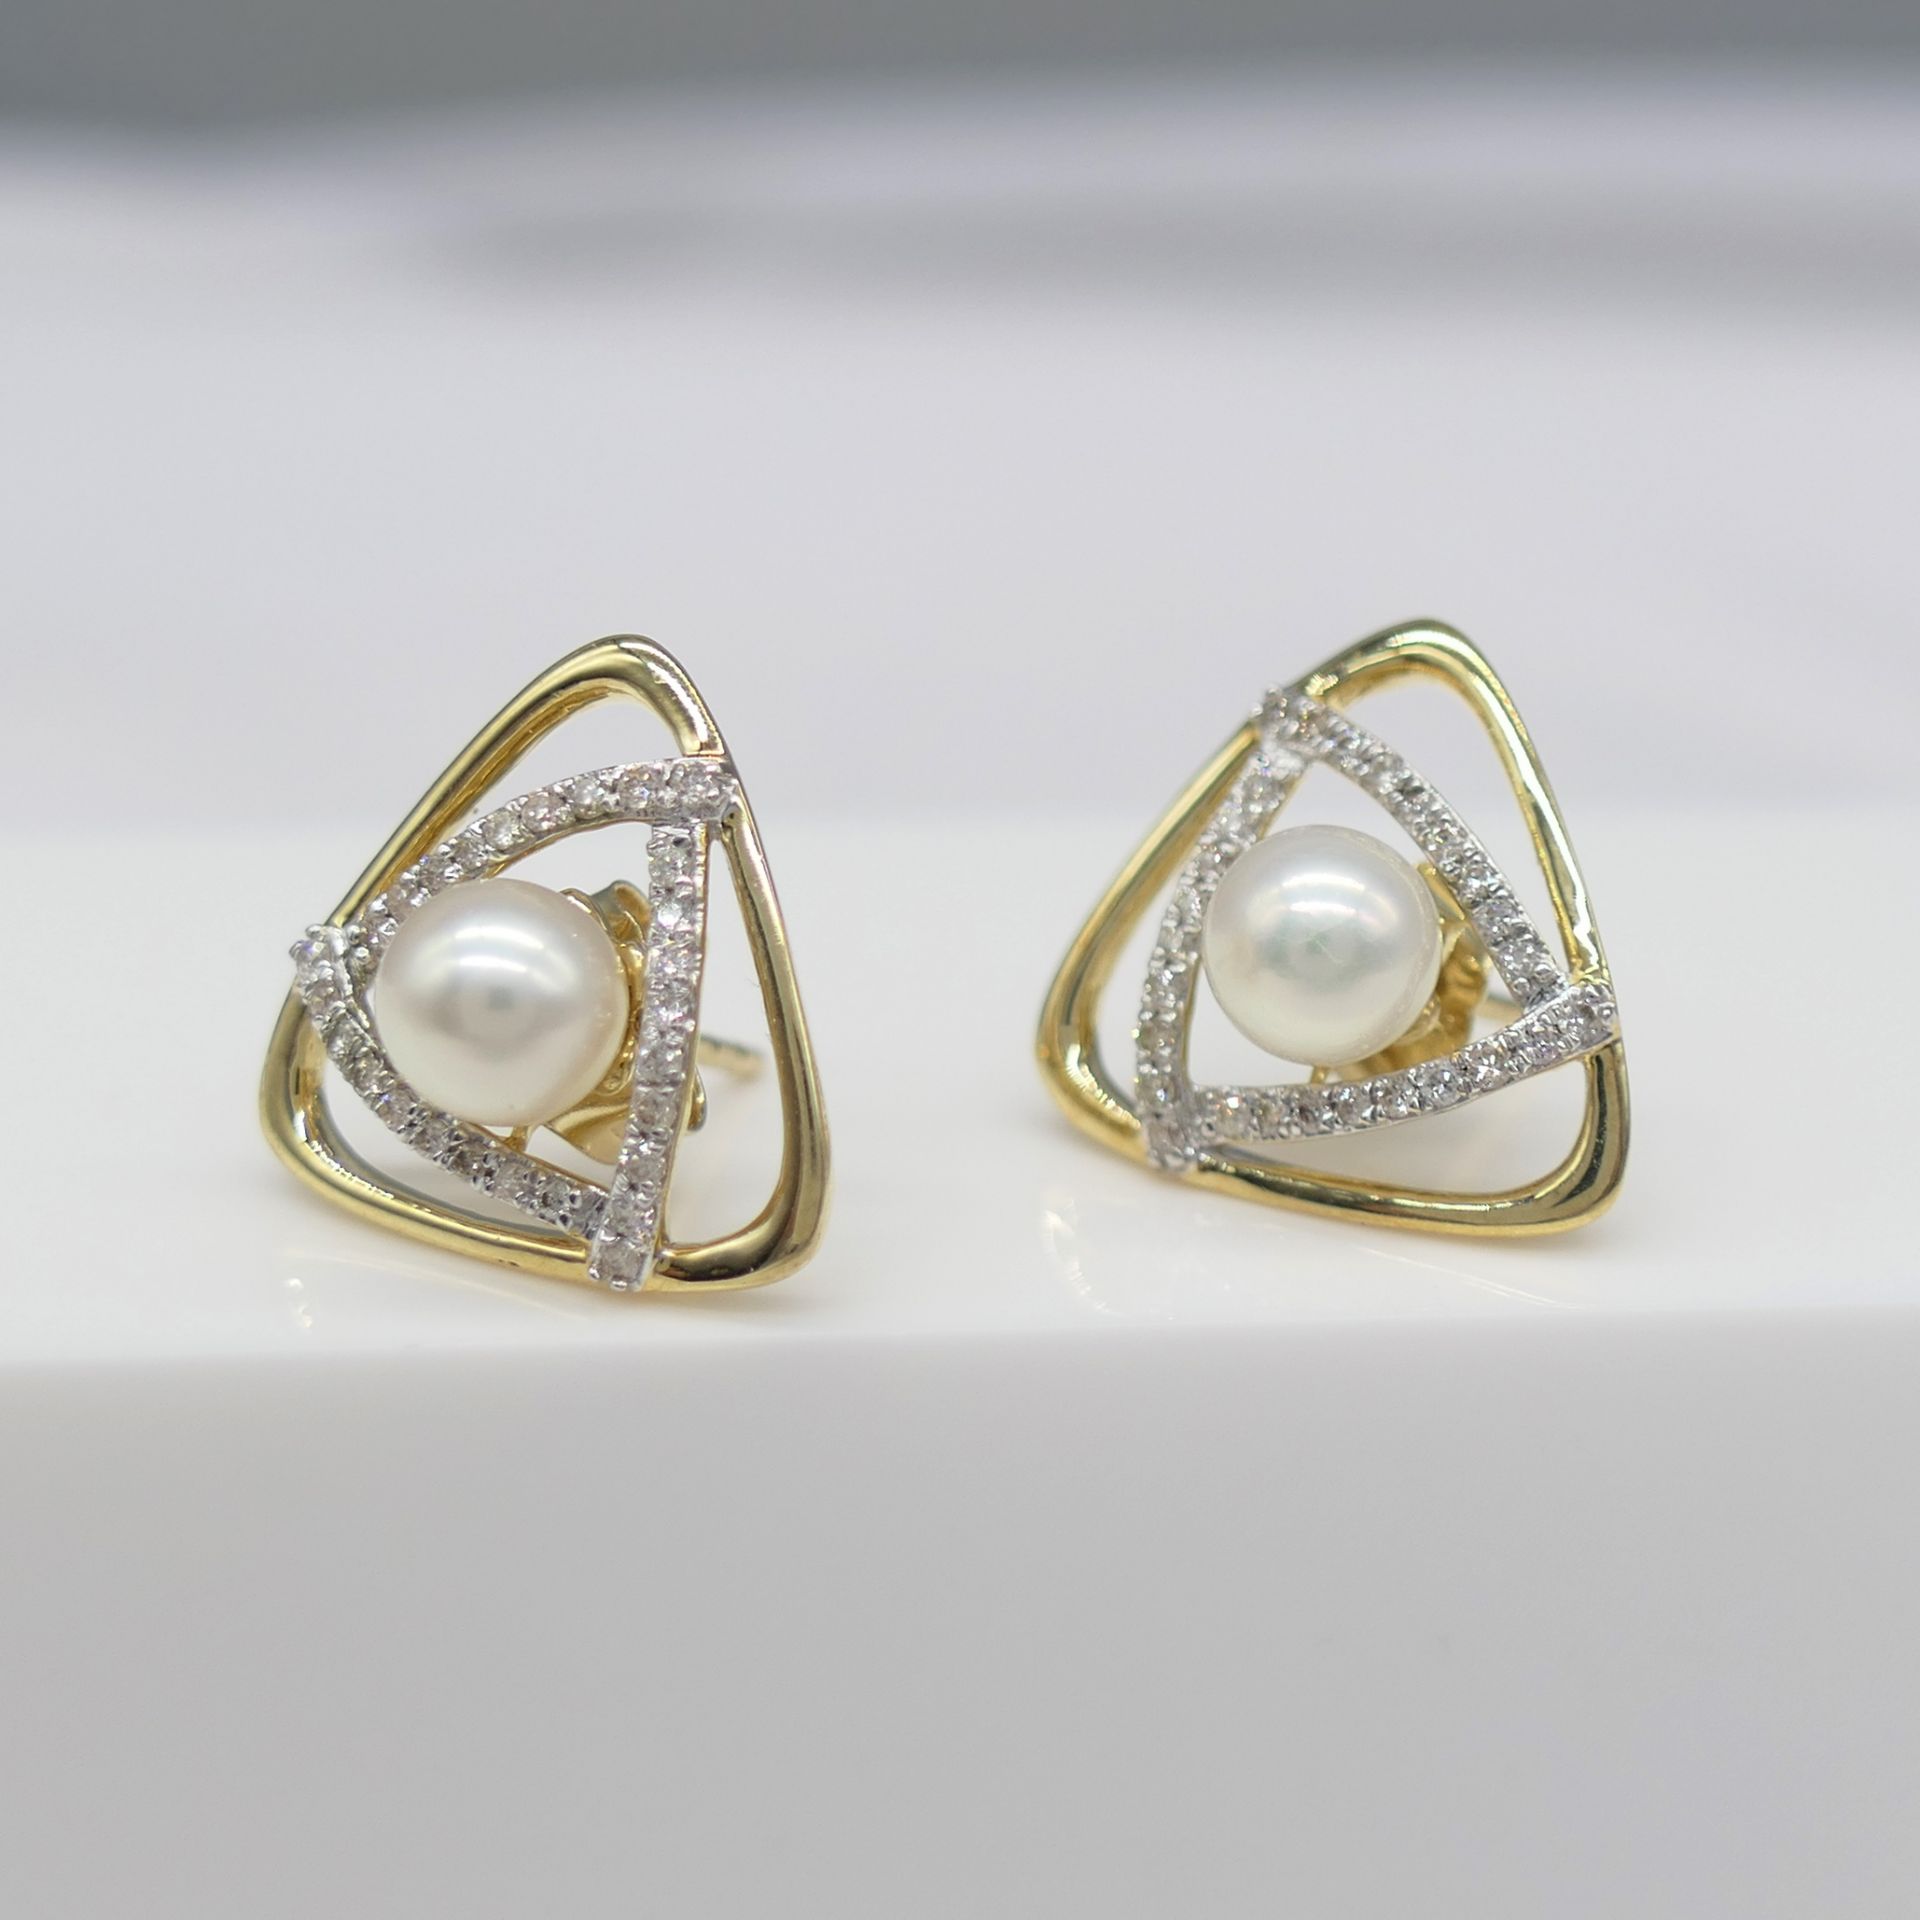 Pair of 9ct Yellow Gold Triangular Ear Studs Set With Cultured Pearls and Diamonds, Boxed - Image 4 of 5